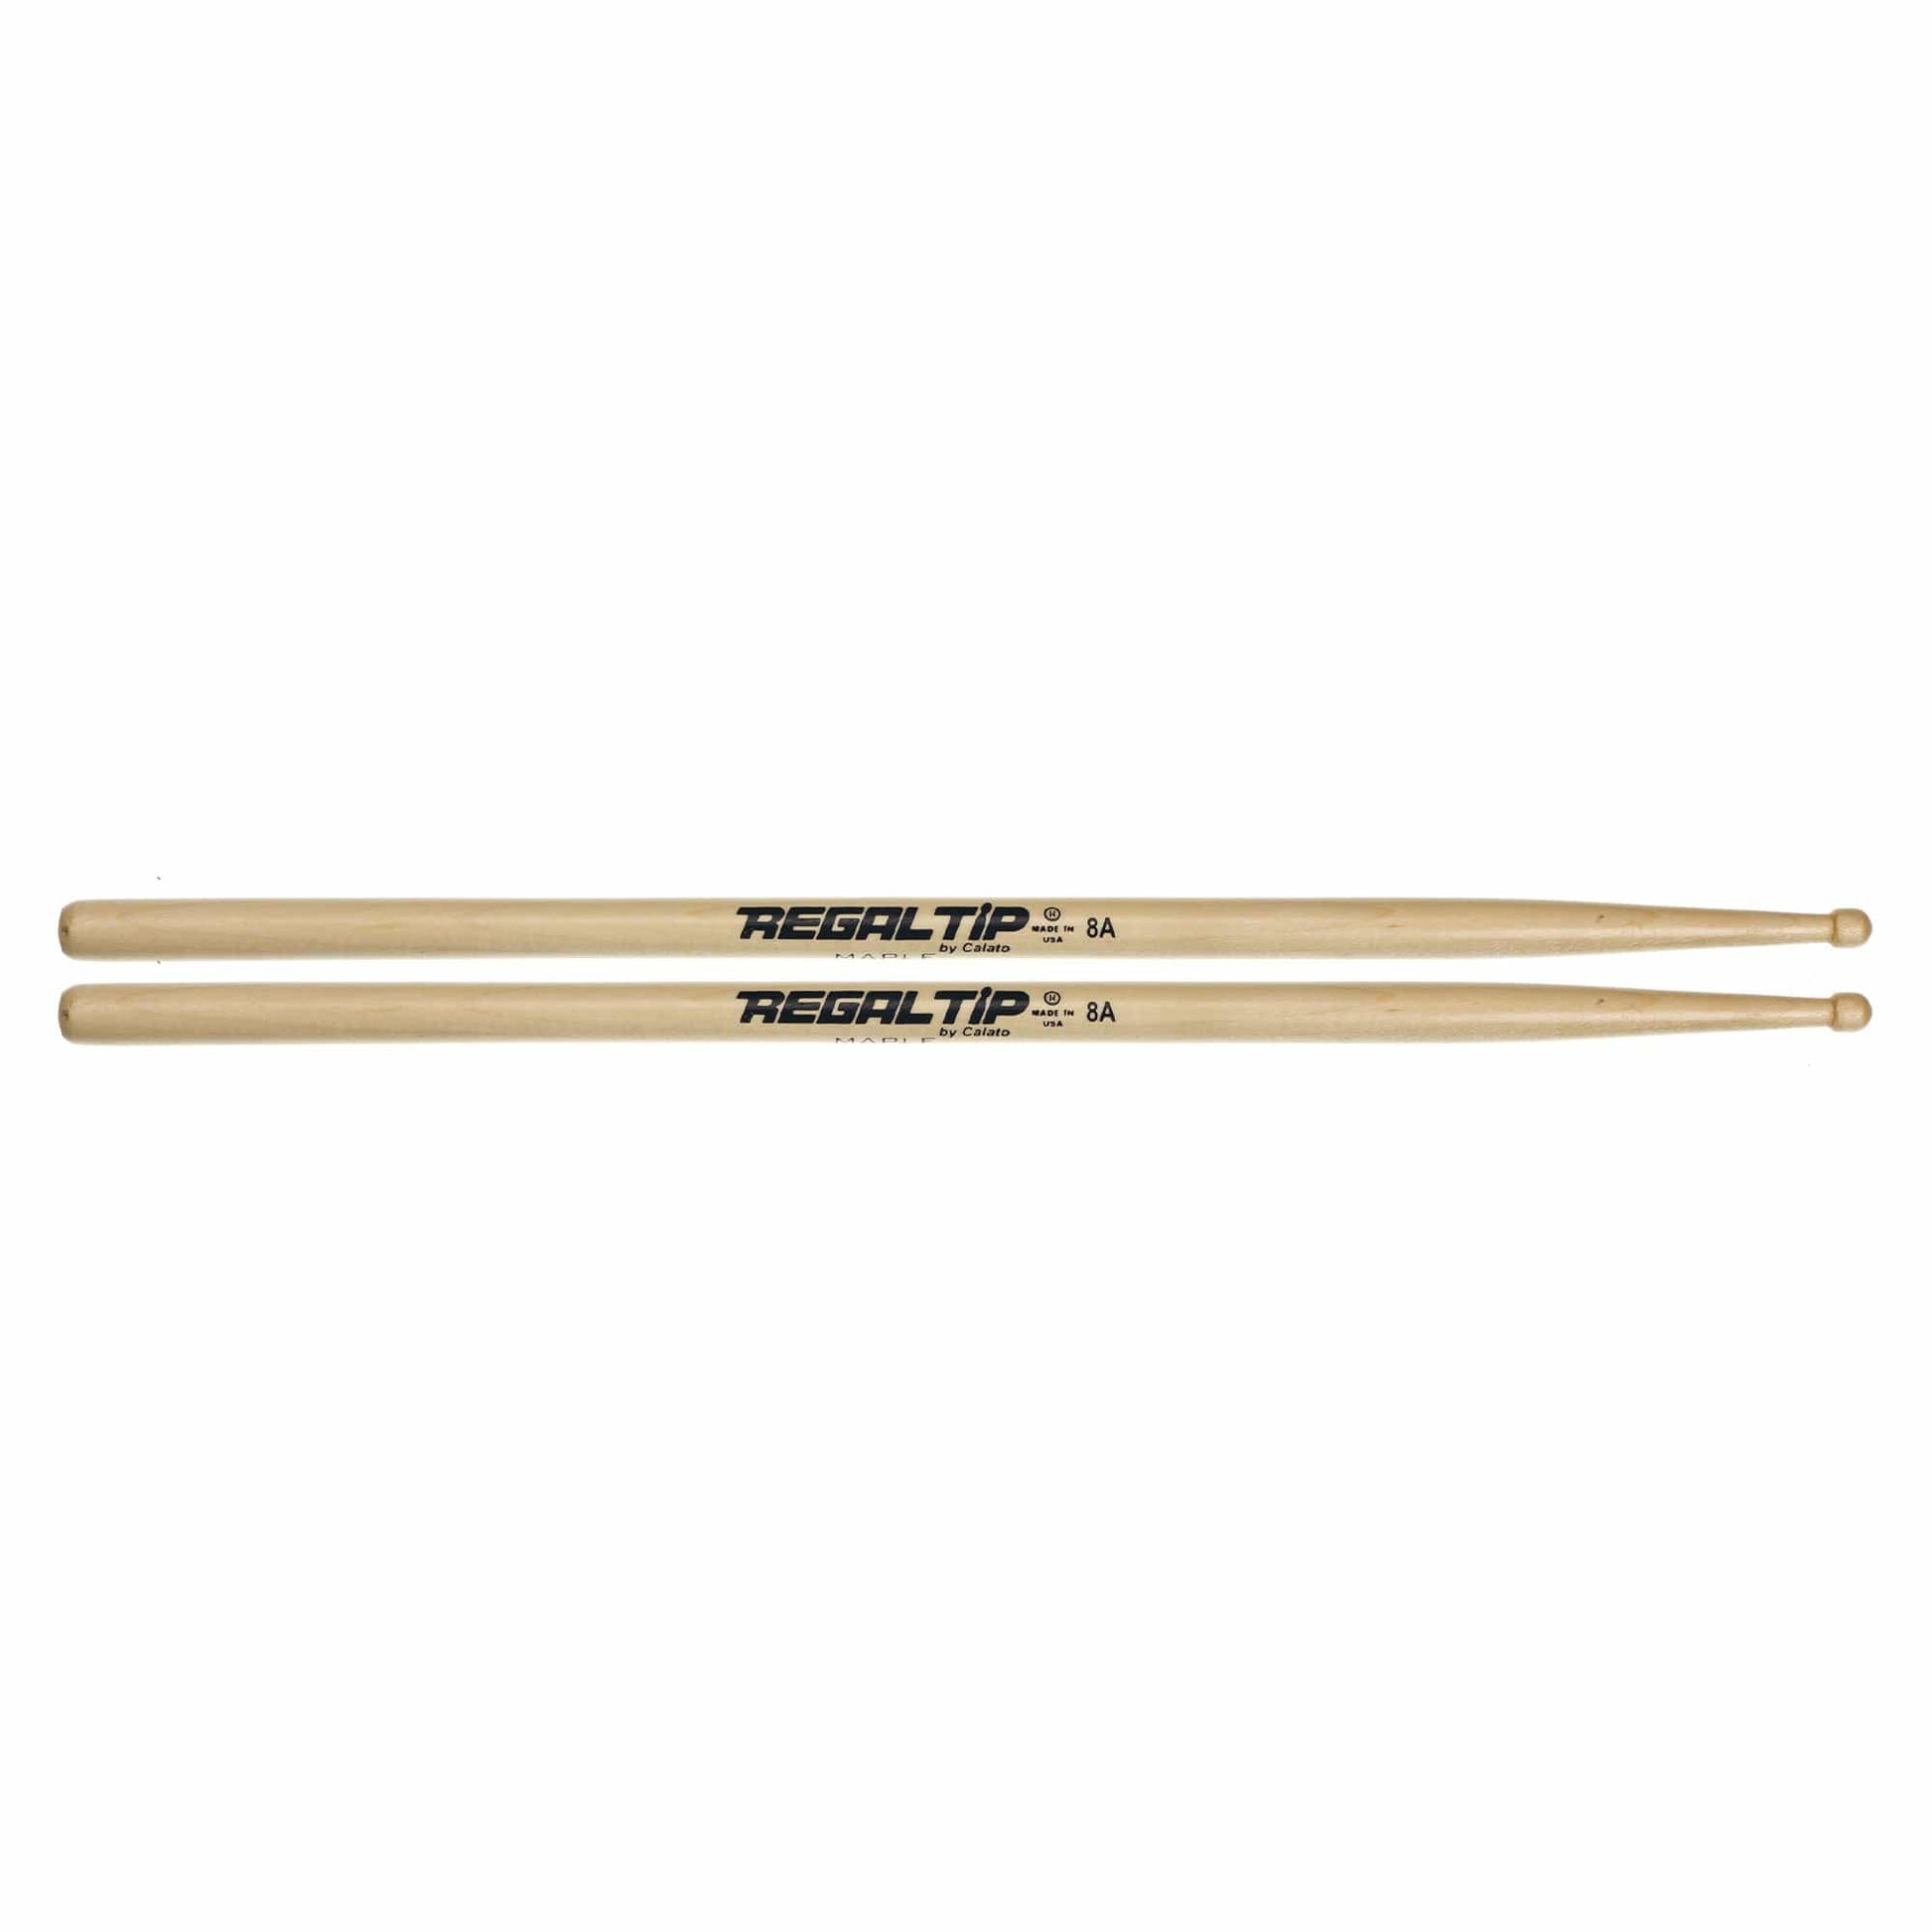 Regal Tip 8A Maple Wood Tip Drum Sticks Drums and Percussion / Parts and Accessories / Drum Sticks and Mallets